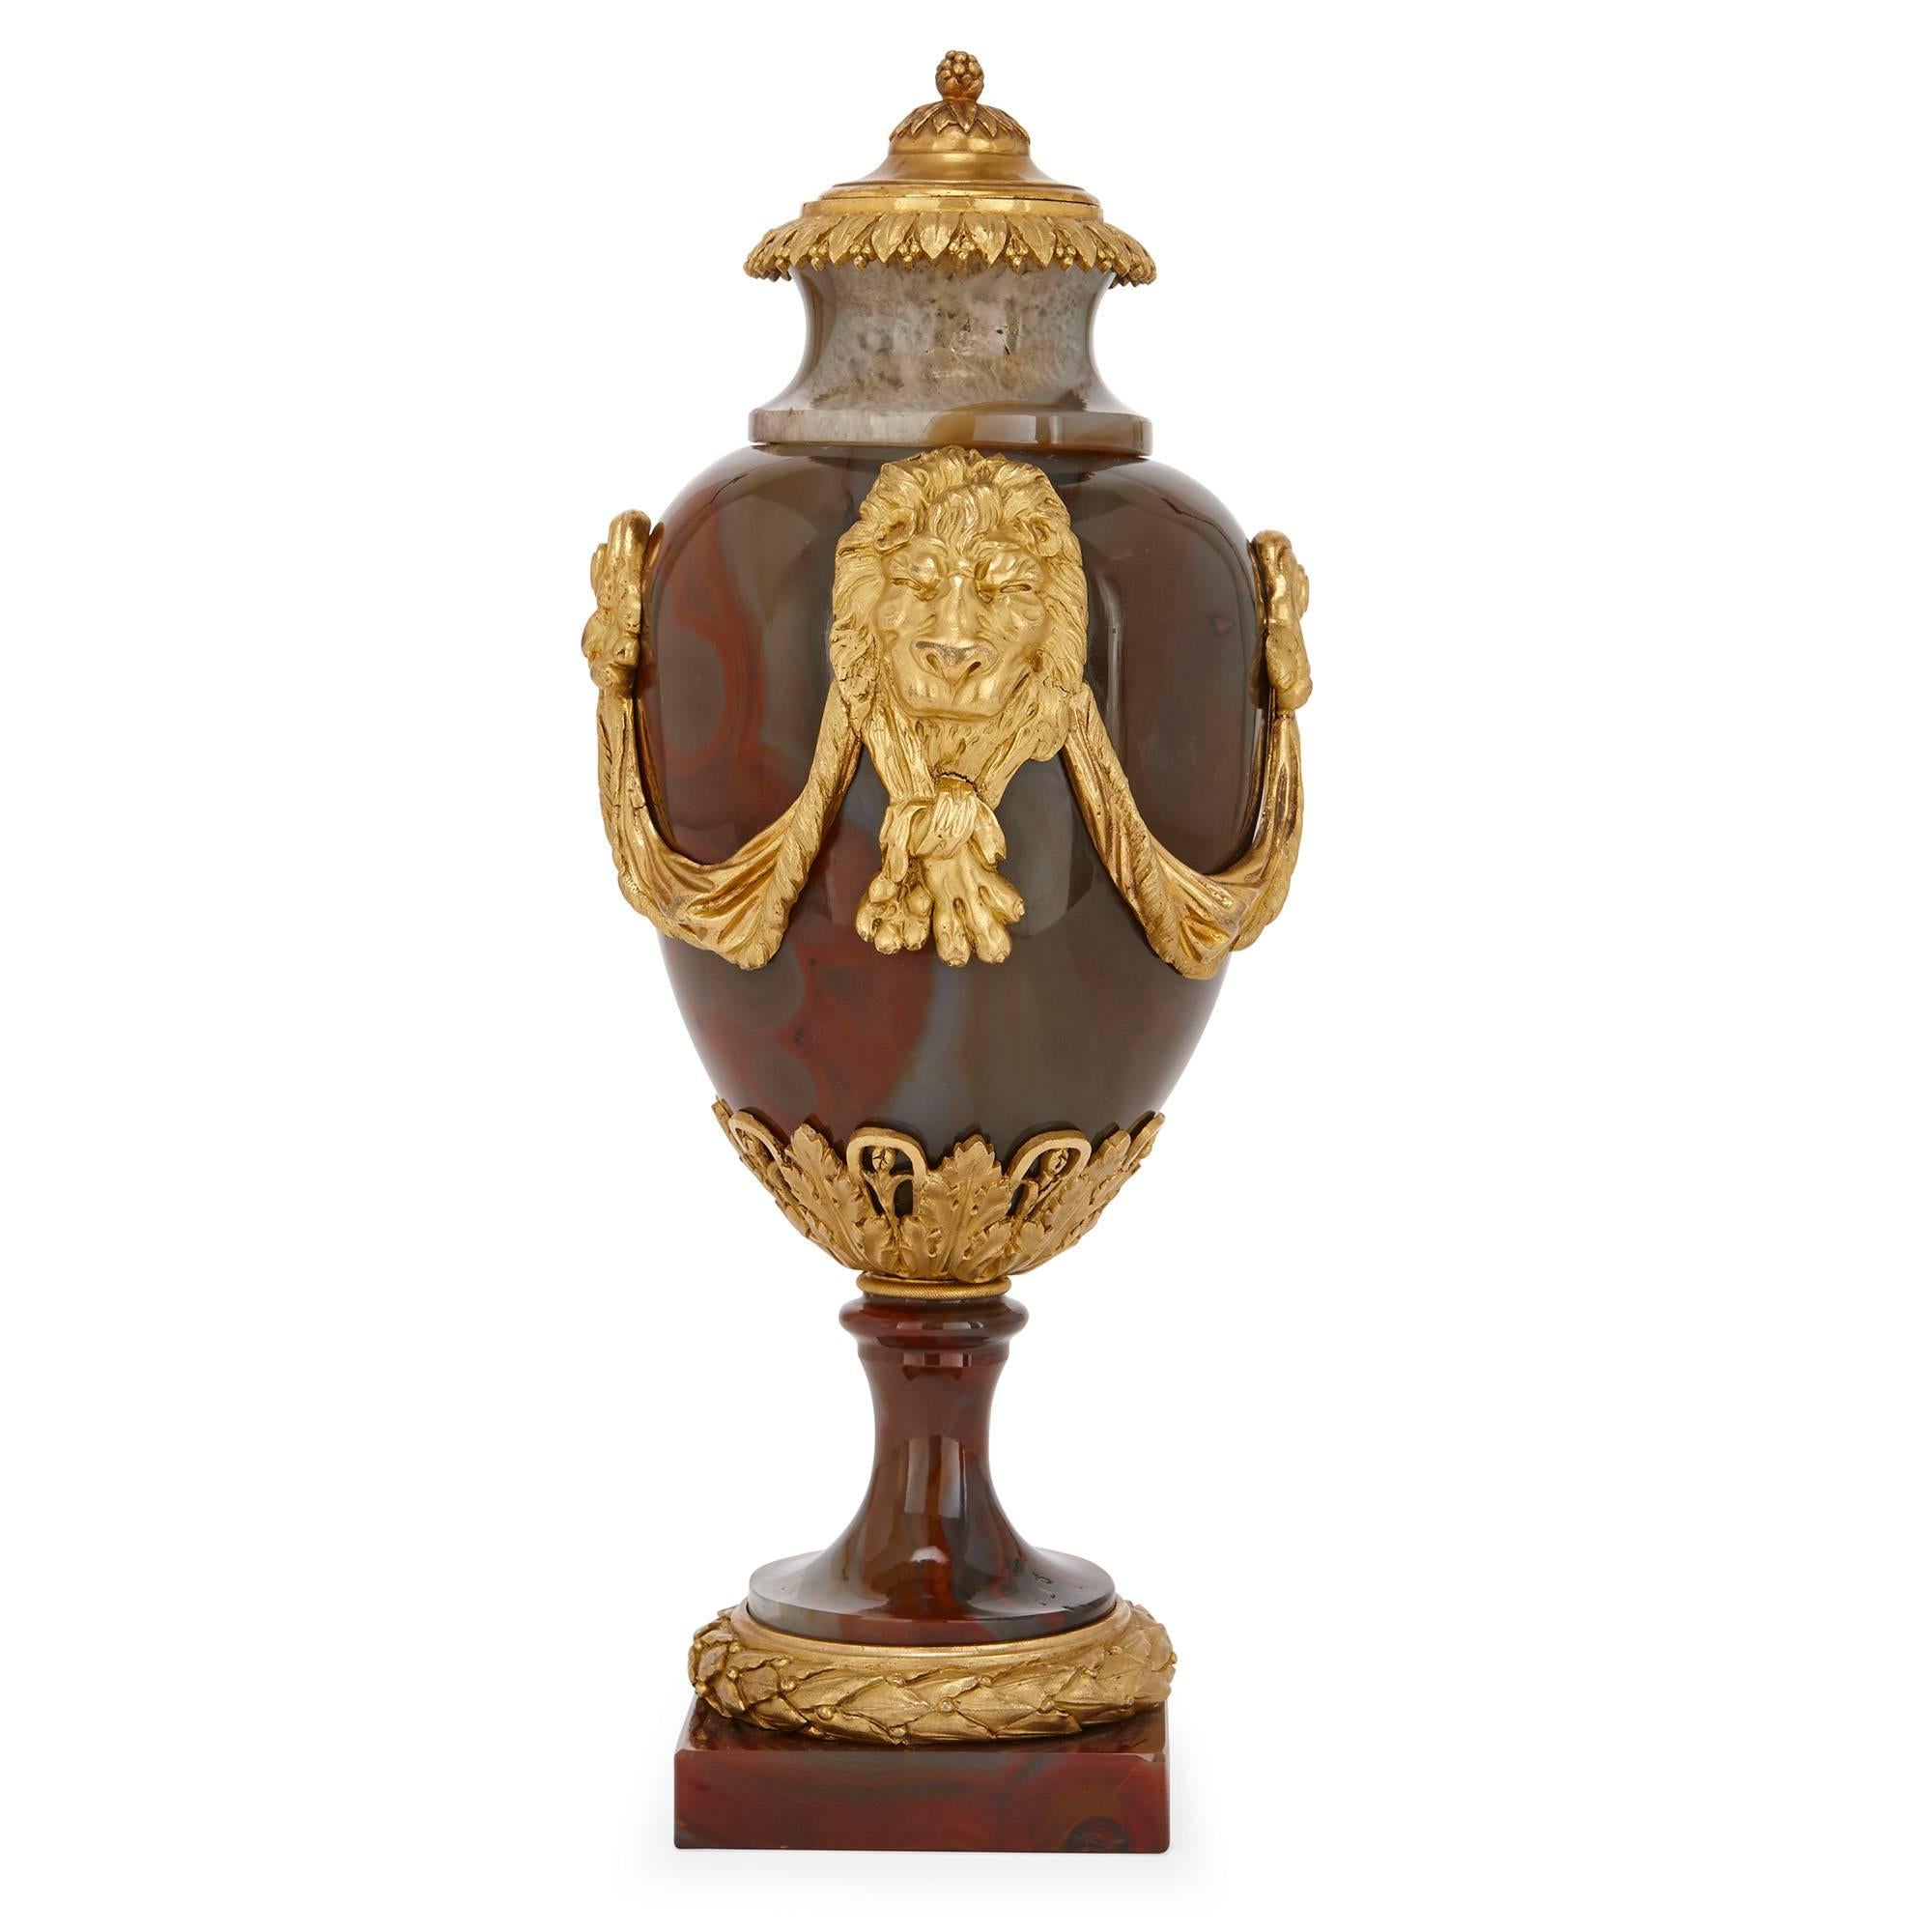 These truly exceptional and rare antique Louis XVI period vases have been sculpted from agate, a precious and highly sought-after stone. The vases are set on square agate bases with gilt bronze laurel wreath socles. The burgundy and claret agate